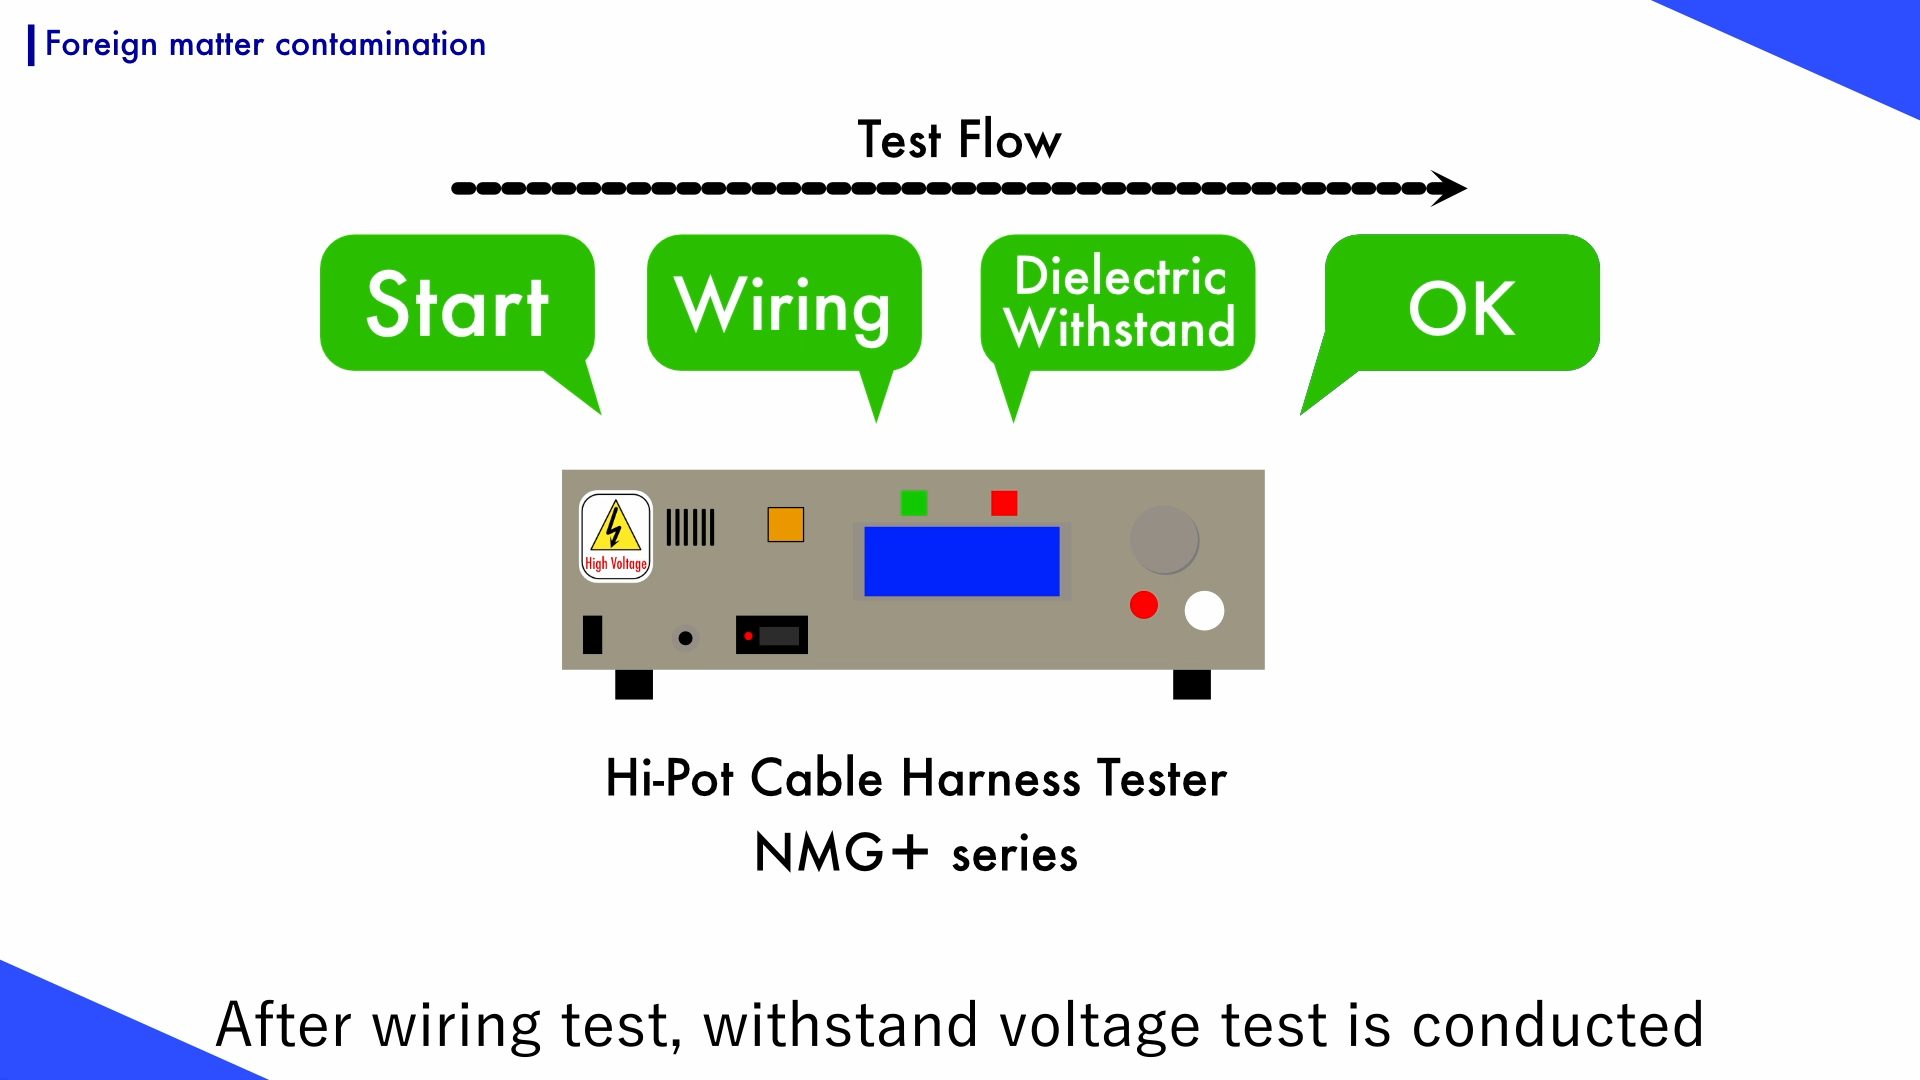 Cable harness testers can perform withstand voltage test after wiring test